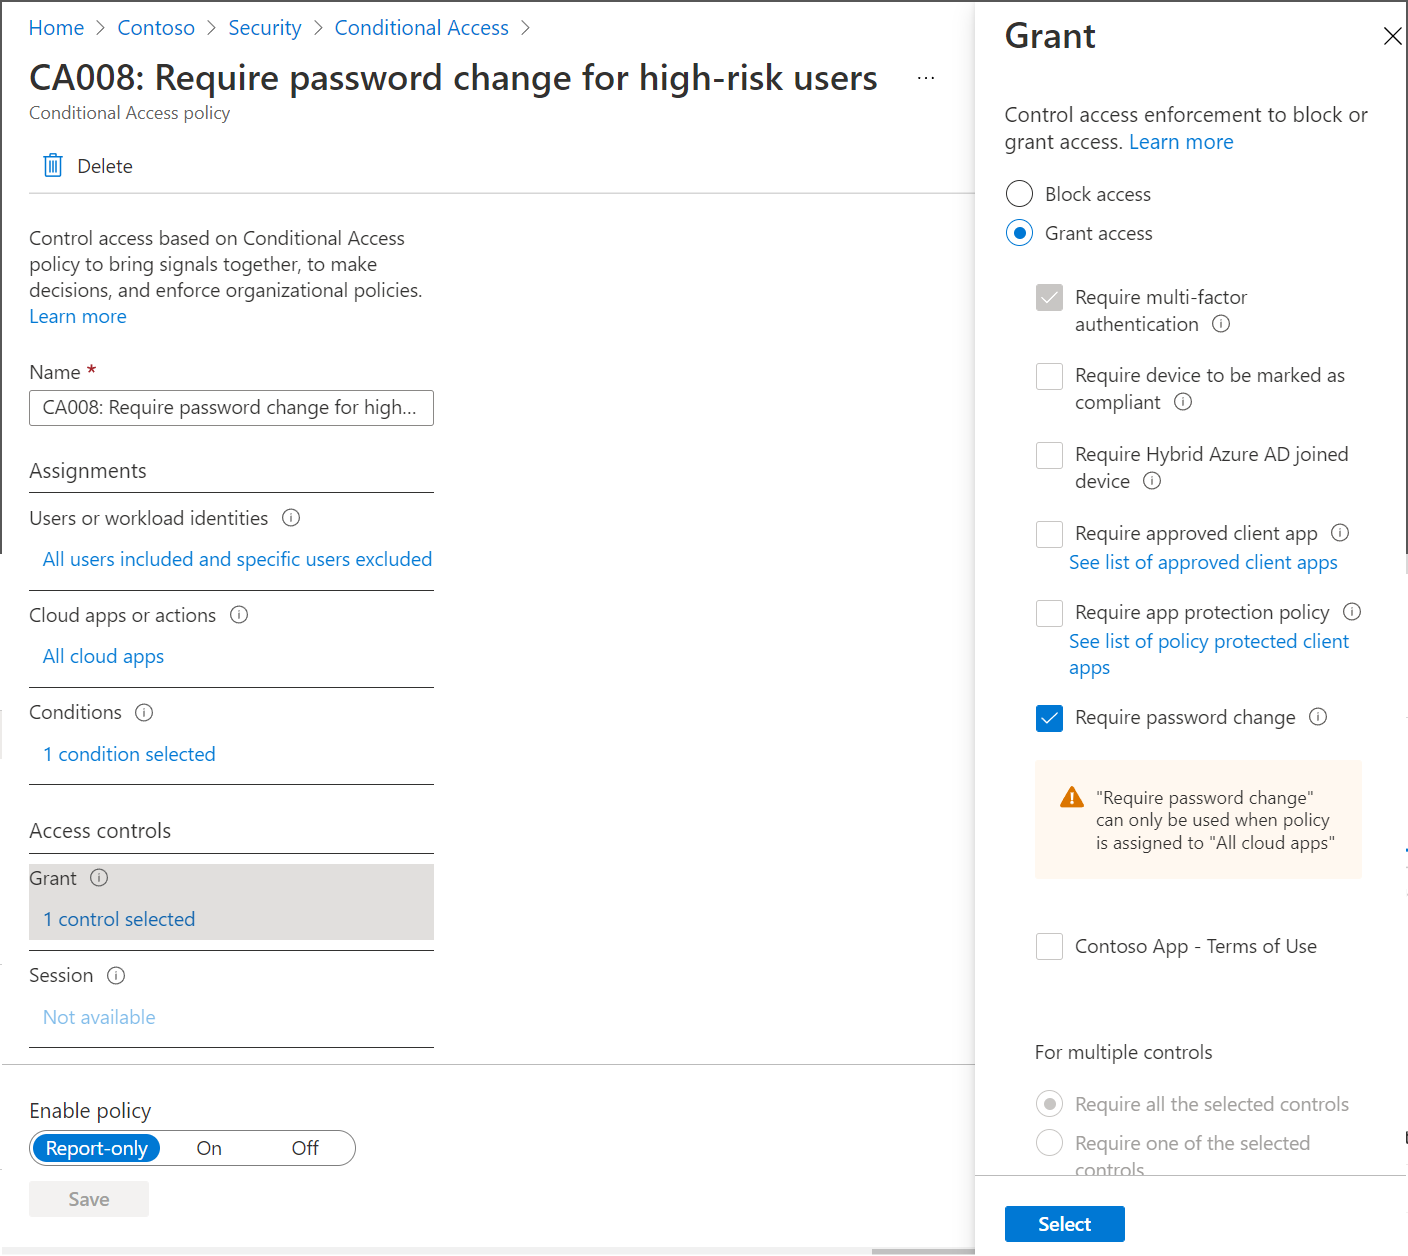 Conditional Access policy requiring password change for high risk users.